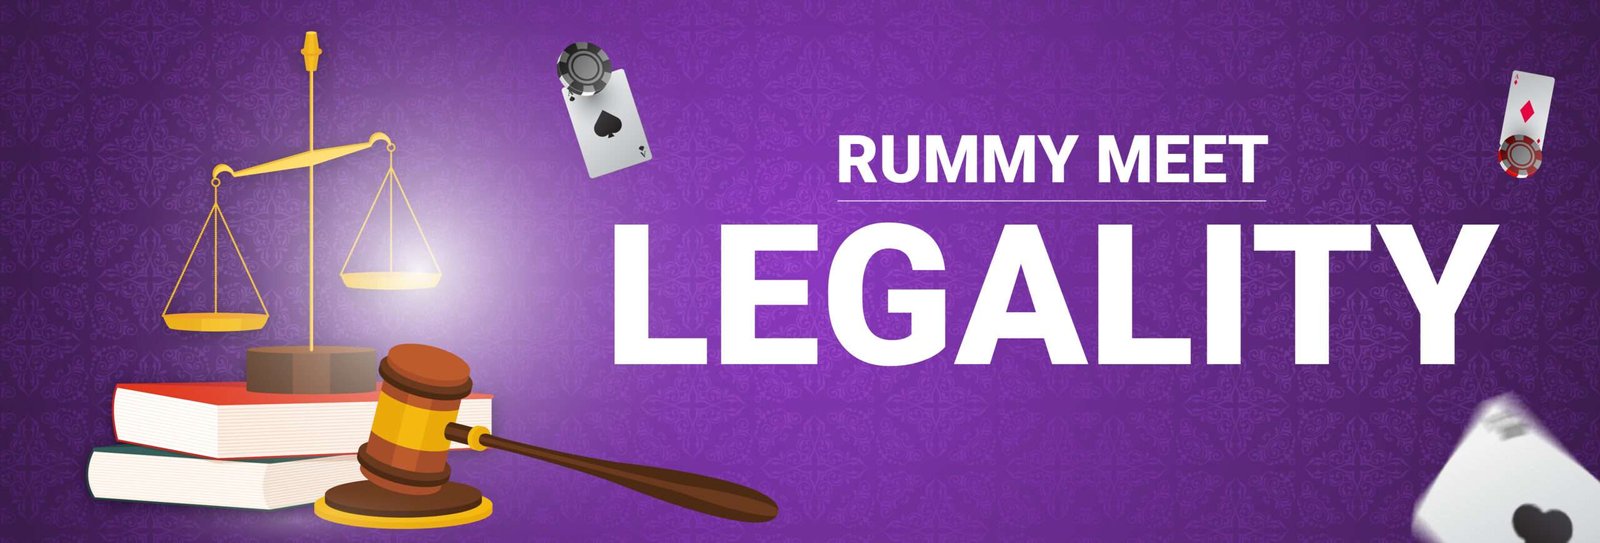 Rummy- meet-Legality and is legal rummy in India